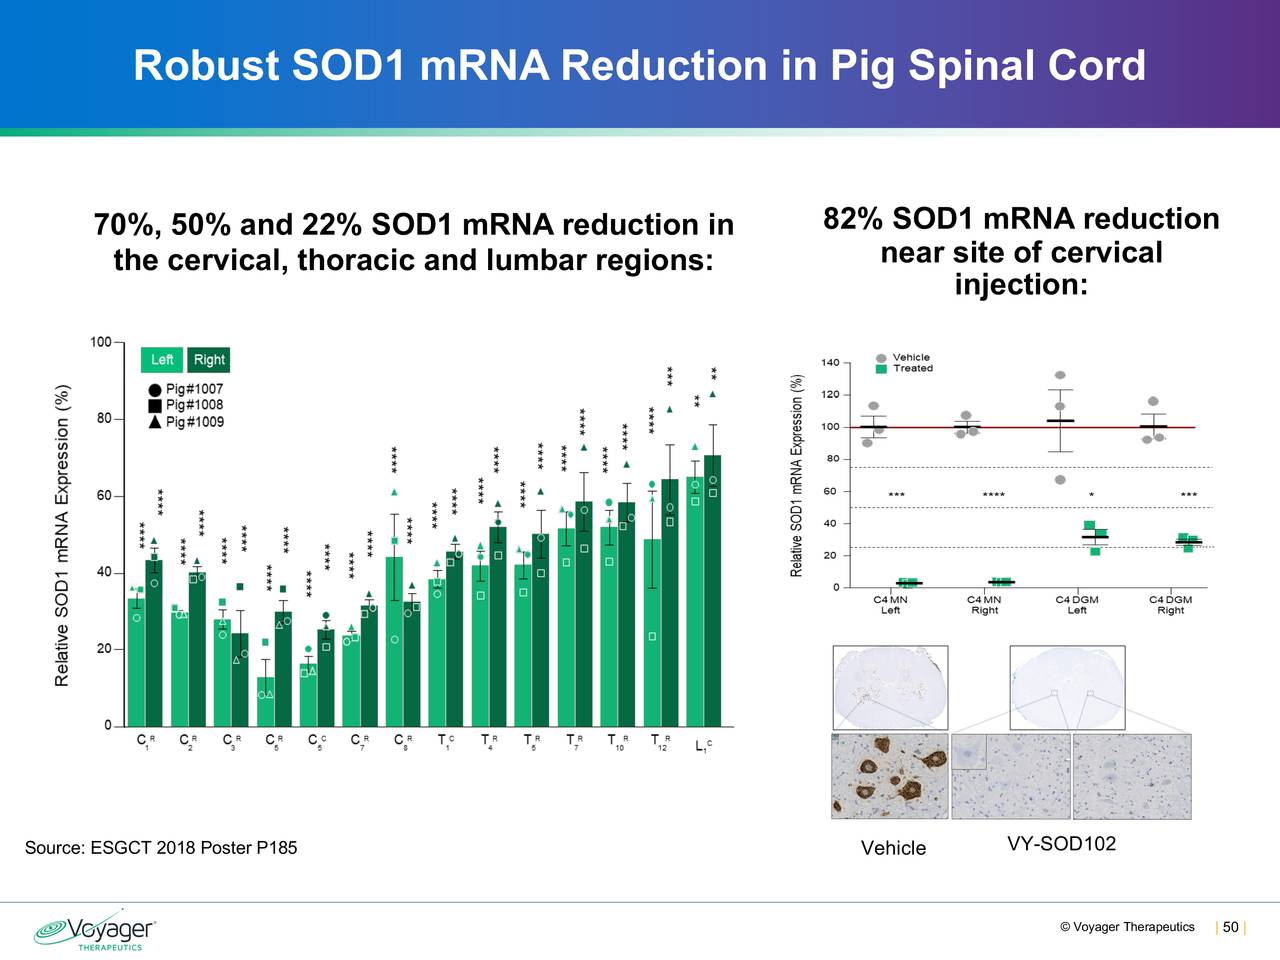 Robust SOD1 mRNA Reduction in Pig Spinal Cord